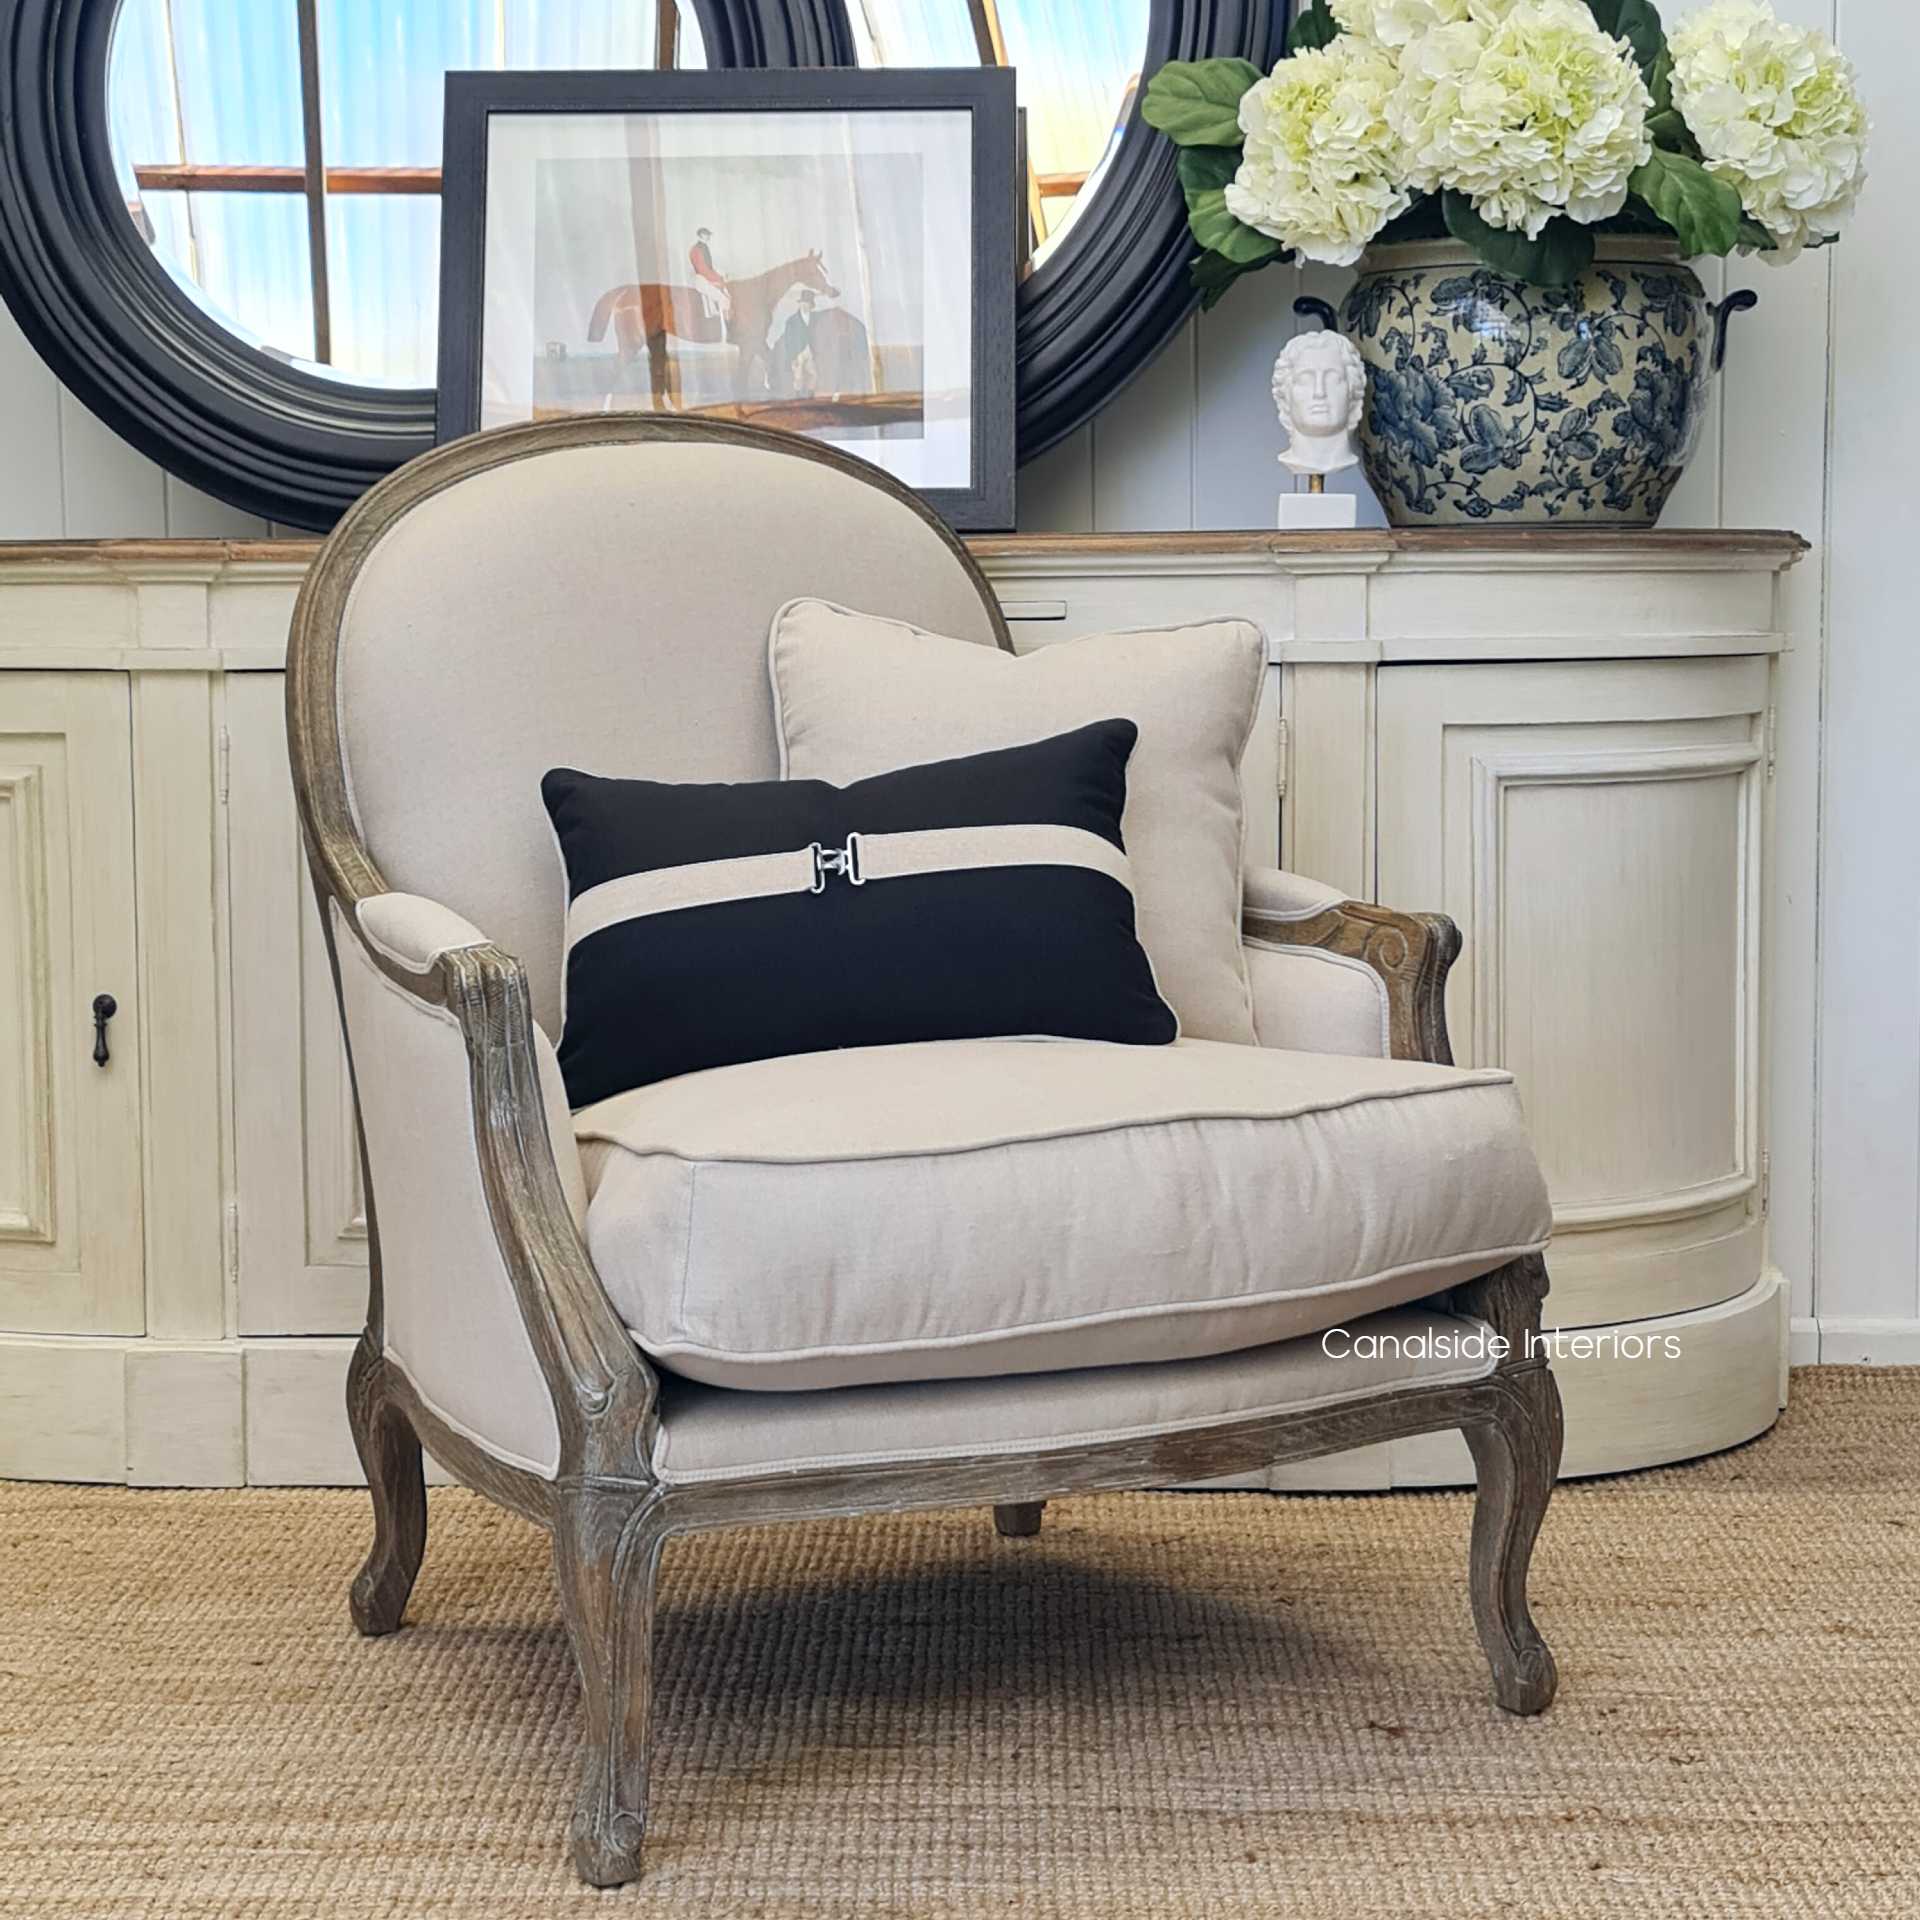 Monette Occasional Armchair Weathered Oak with Cream Upholstery  FRENCH  FURNITURE, CHAIRS, HAMPTONS Style, PLANTATION Style, CHAIRS Lounge, LIVING Room, LIVING Chairs